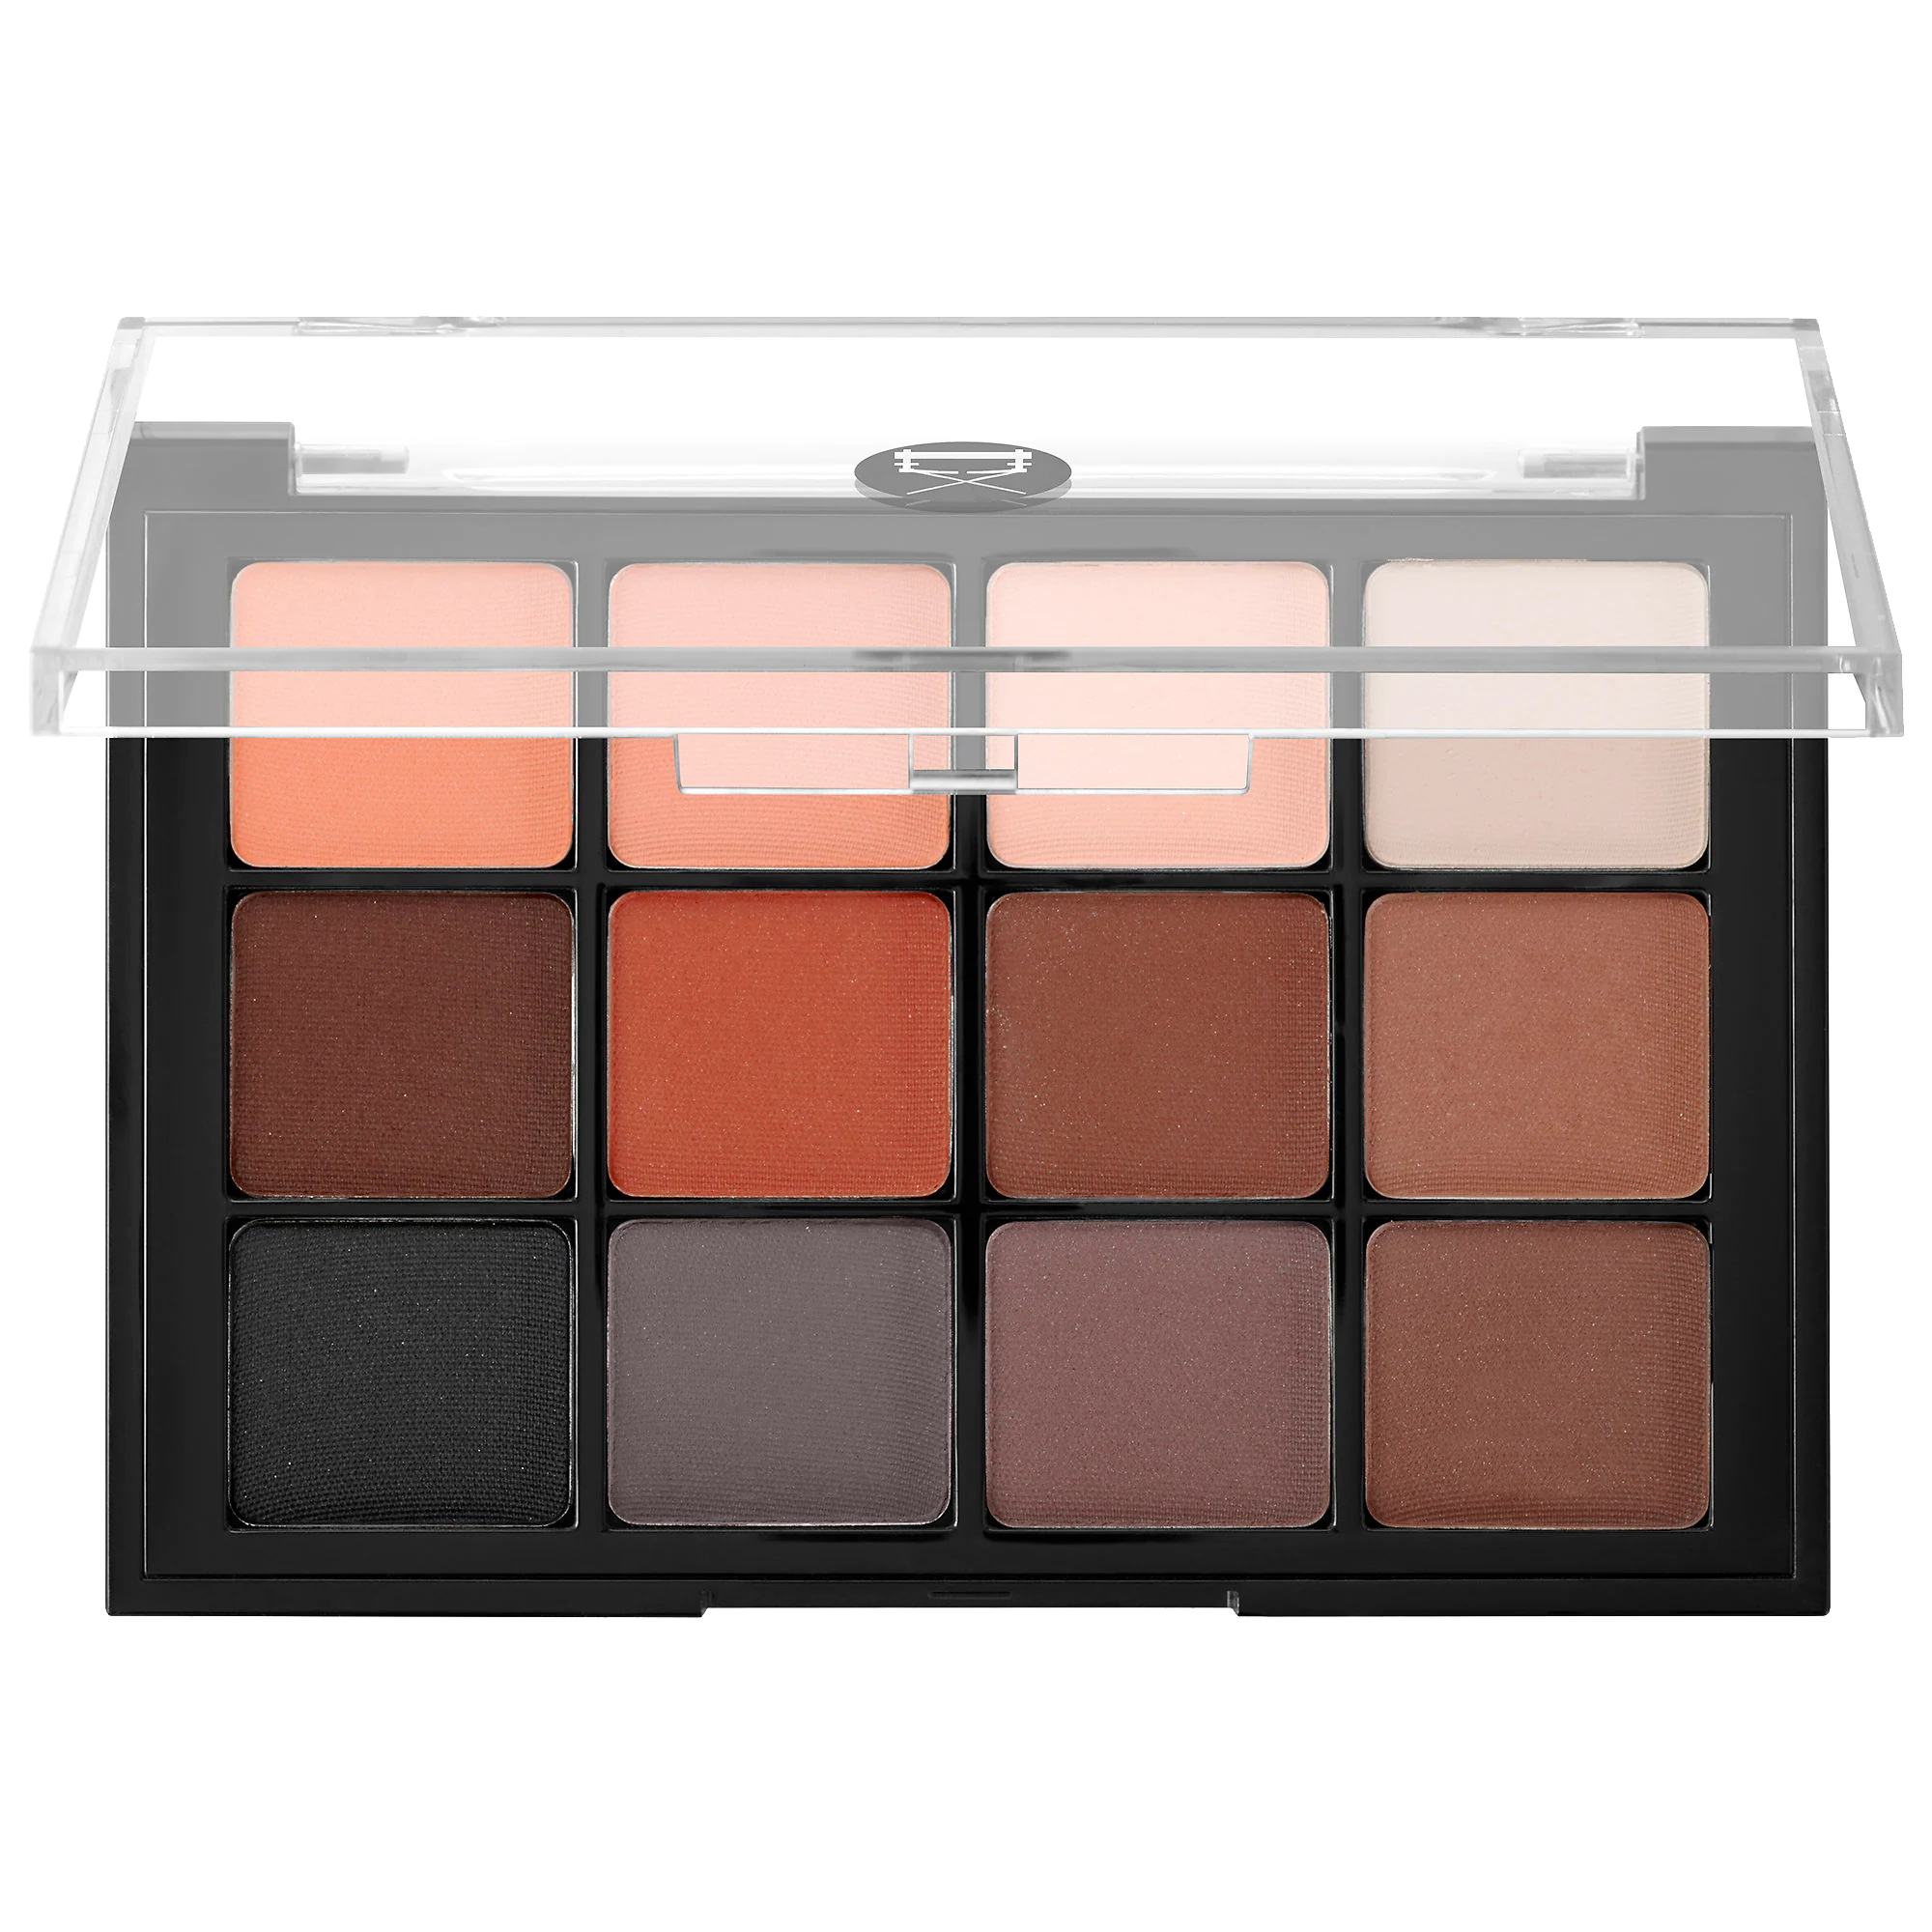 Complete eyeshadow palette set for your makeup collection